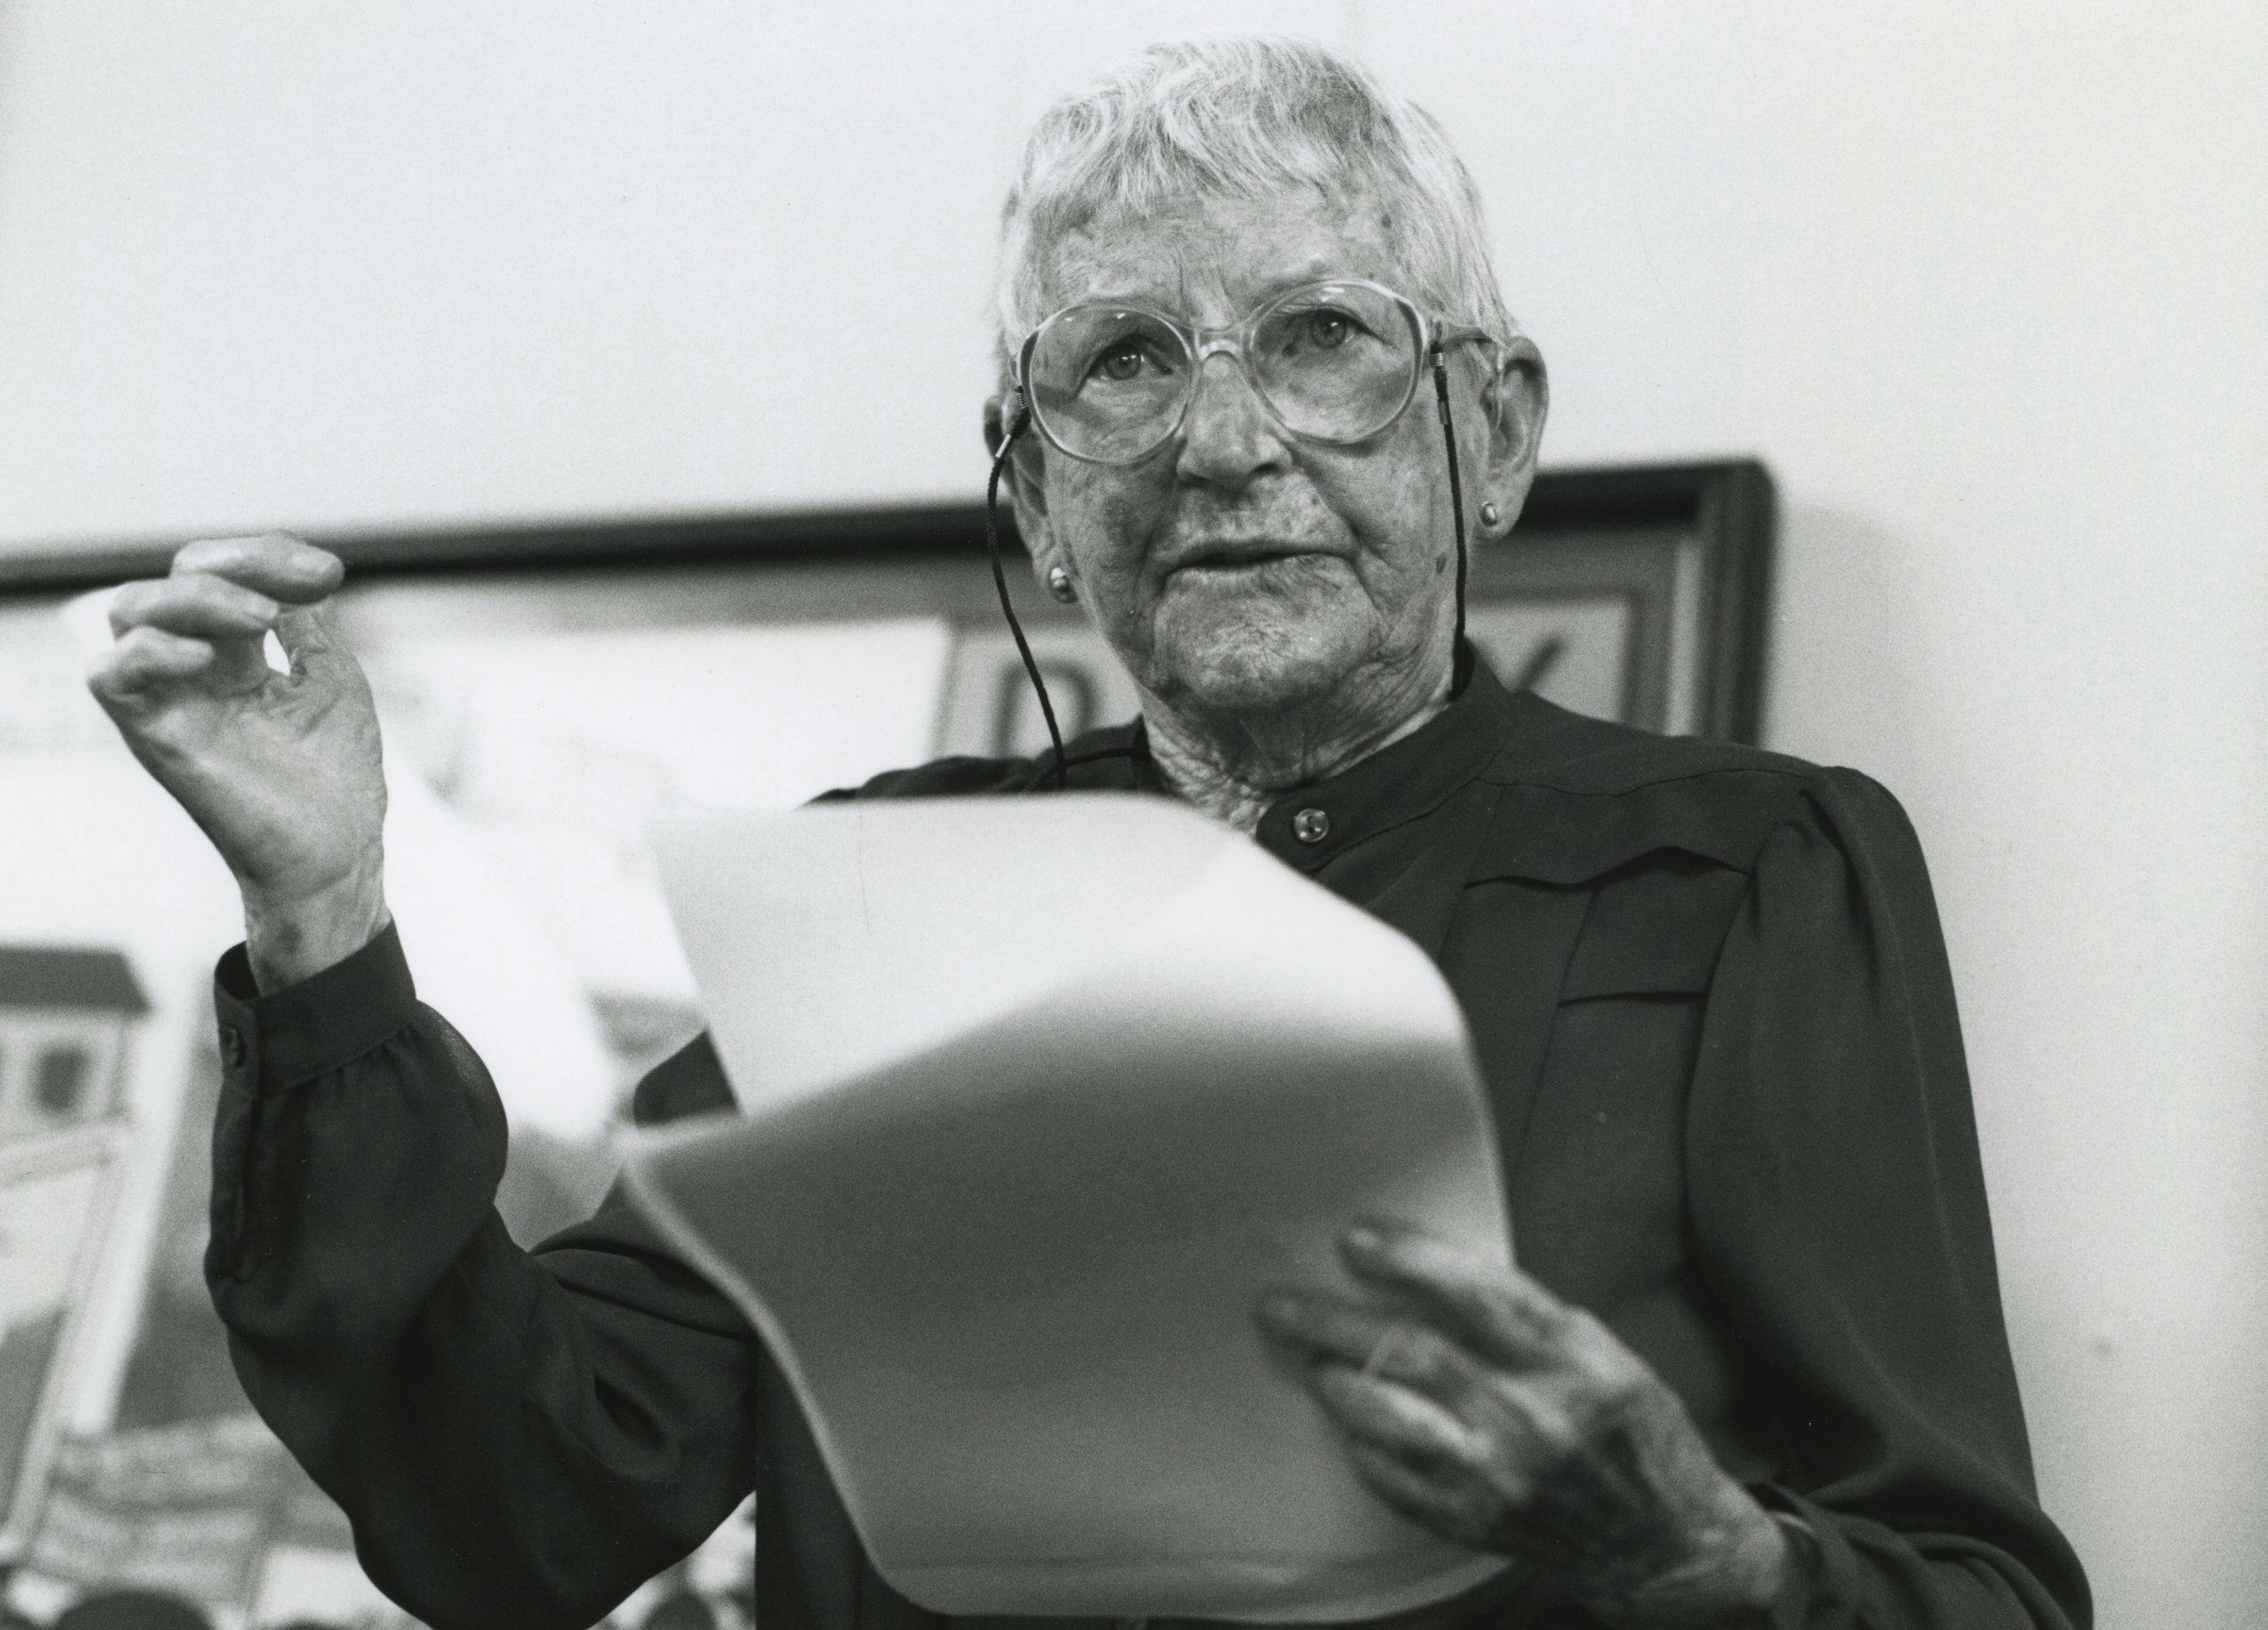 A black and white photo of Edna Ryan, a woman with short white hair and wearing glasses, and holding a piece of paper from which she appears to be reading from as she speaks.